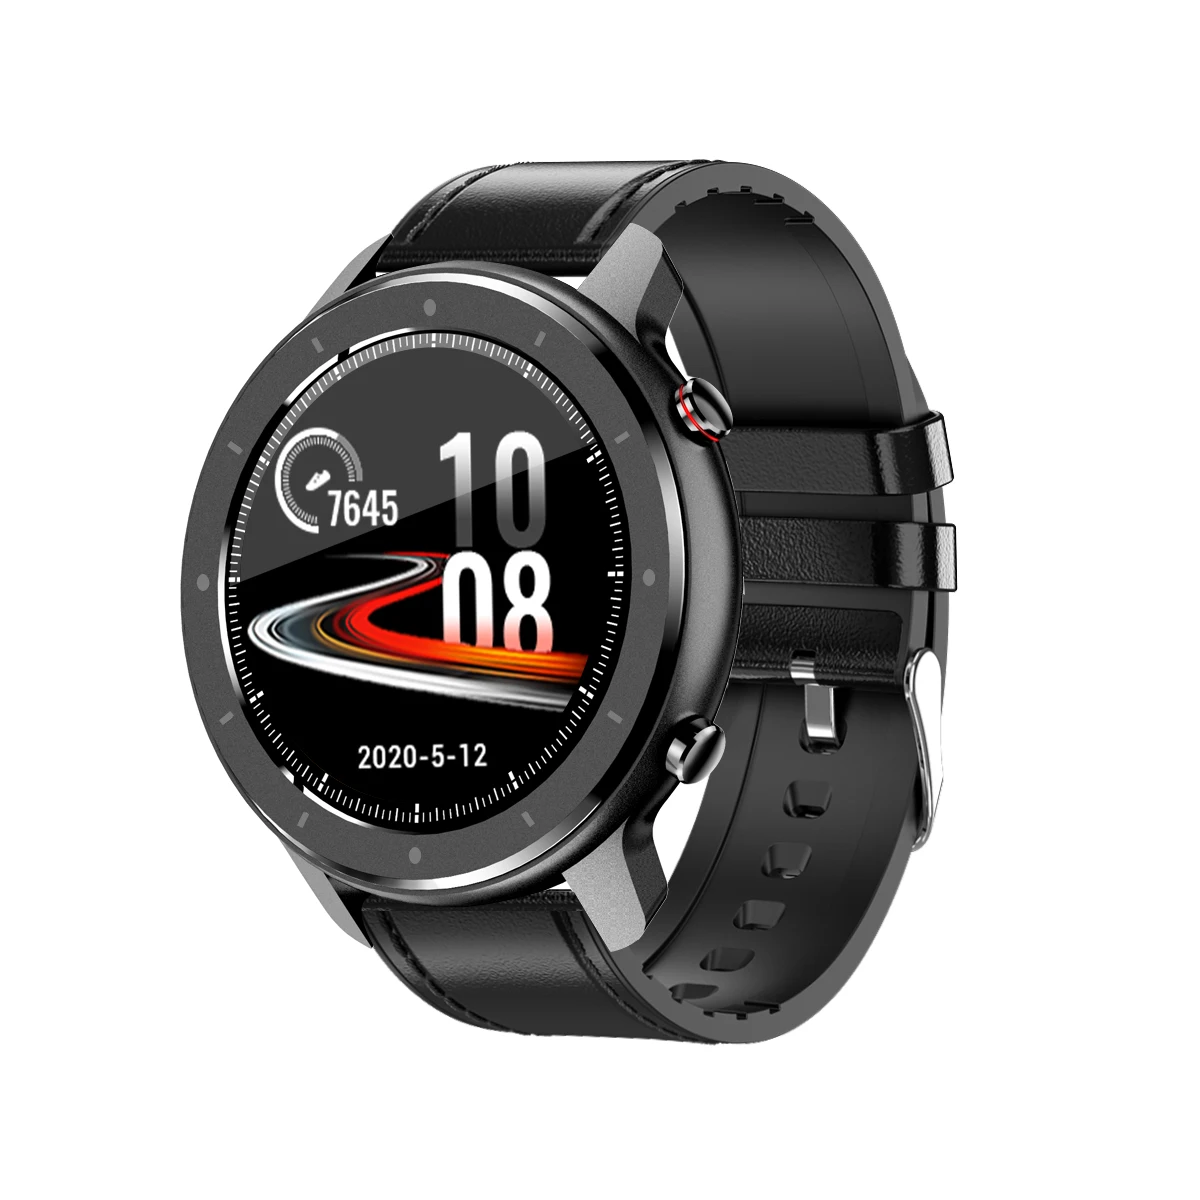 
Alimoto waterproof full touch heart rate detection sports BT call smart music watch 